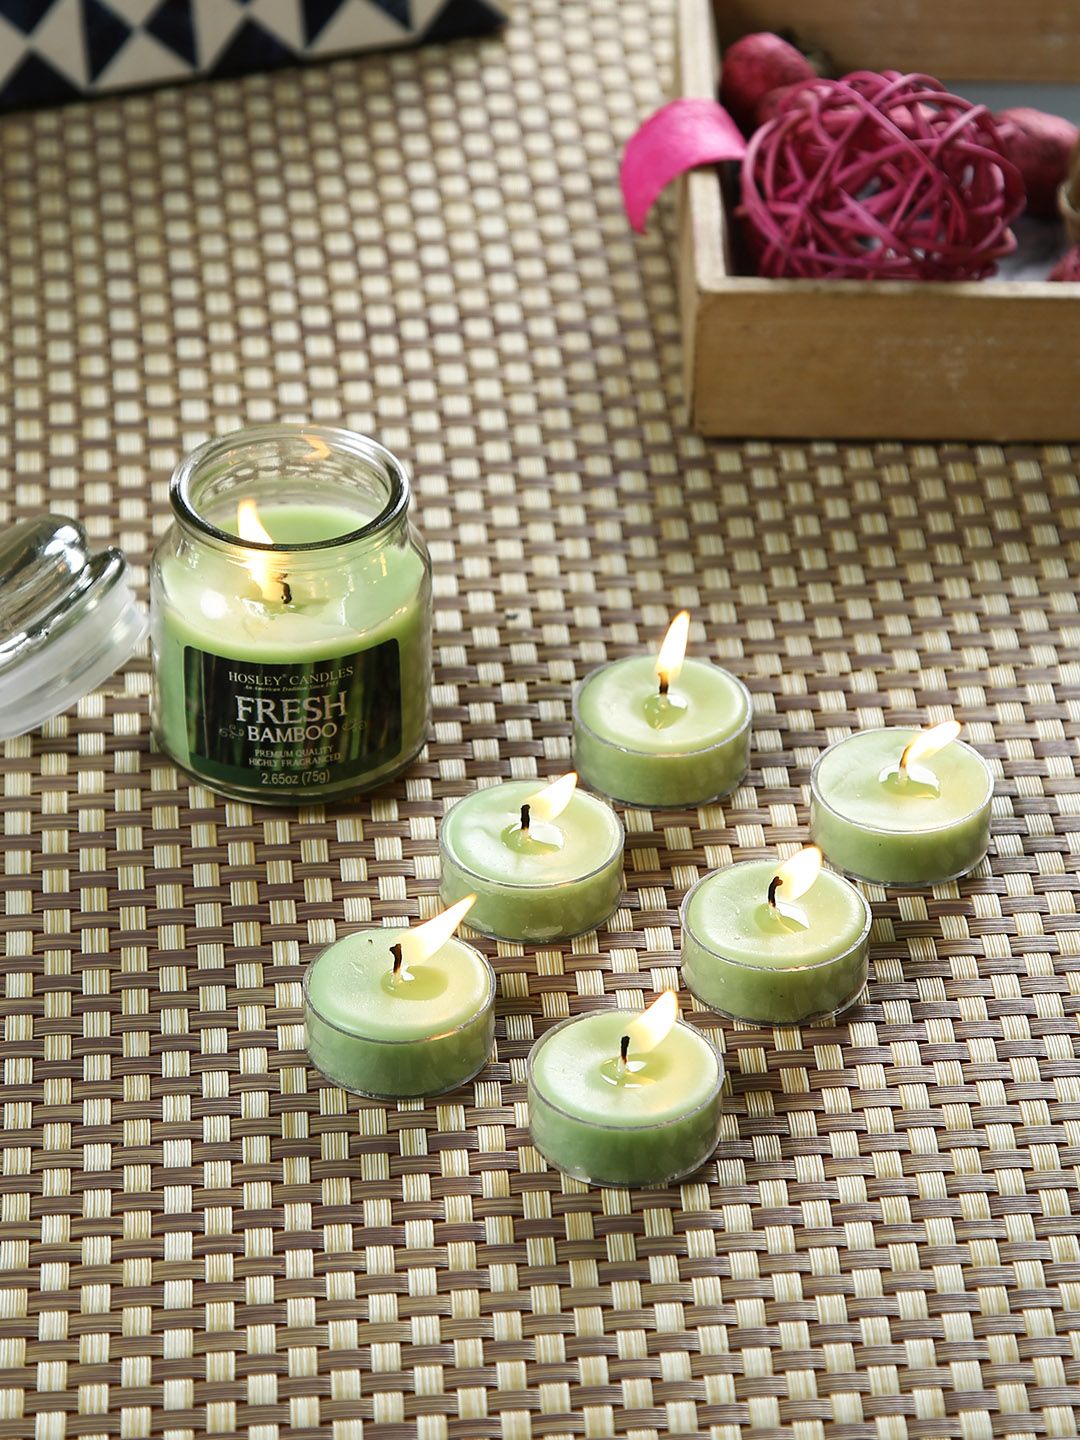 HOSLEY Set of 7 Green Fresh Bamboo Scented Jar Candle With Tealights Price in India